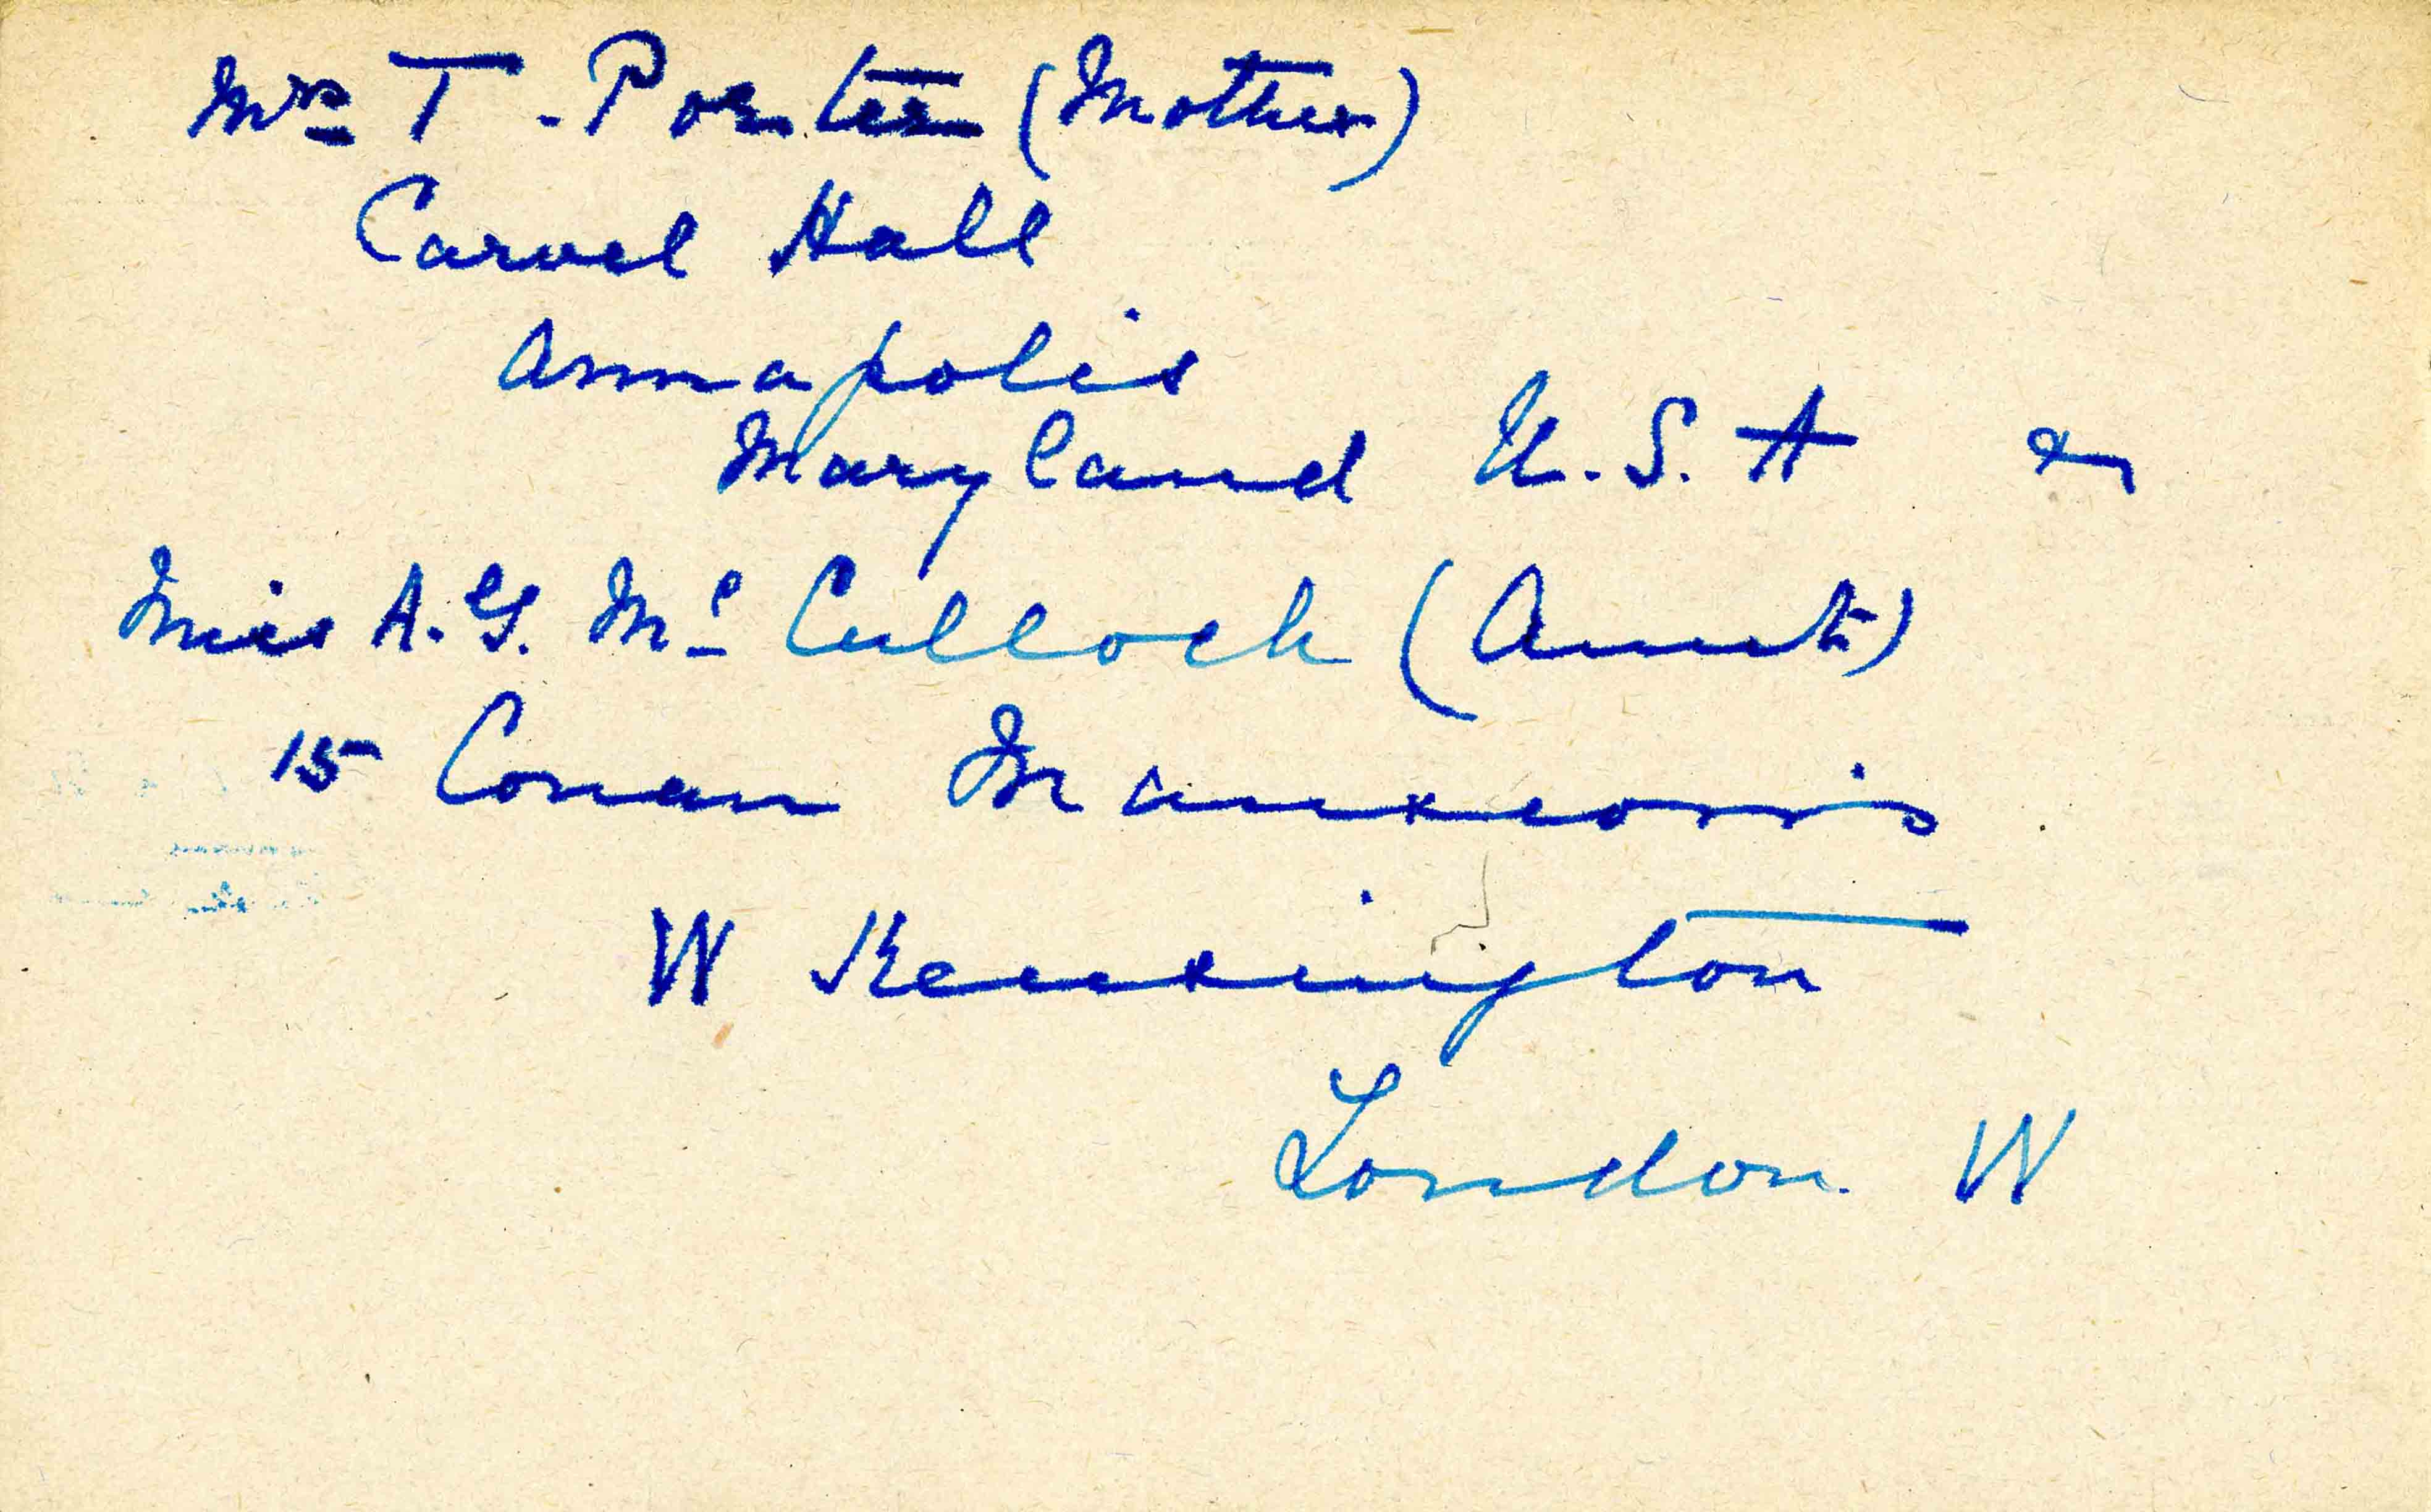 A card with names and addresses of Cheston's mother and aunt written in in blue ink.